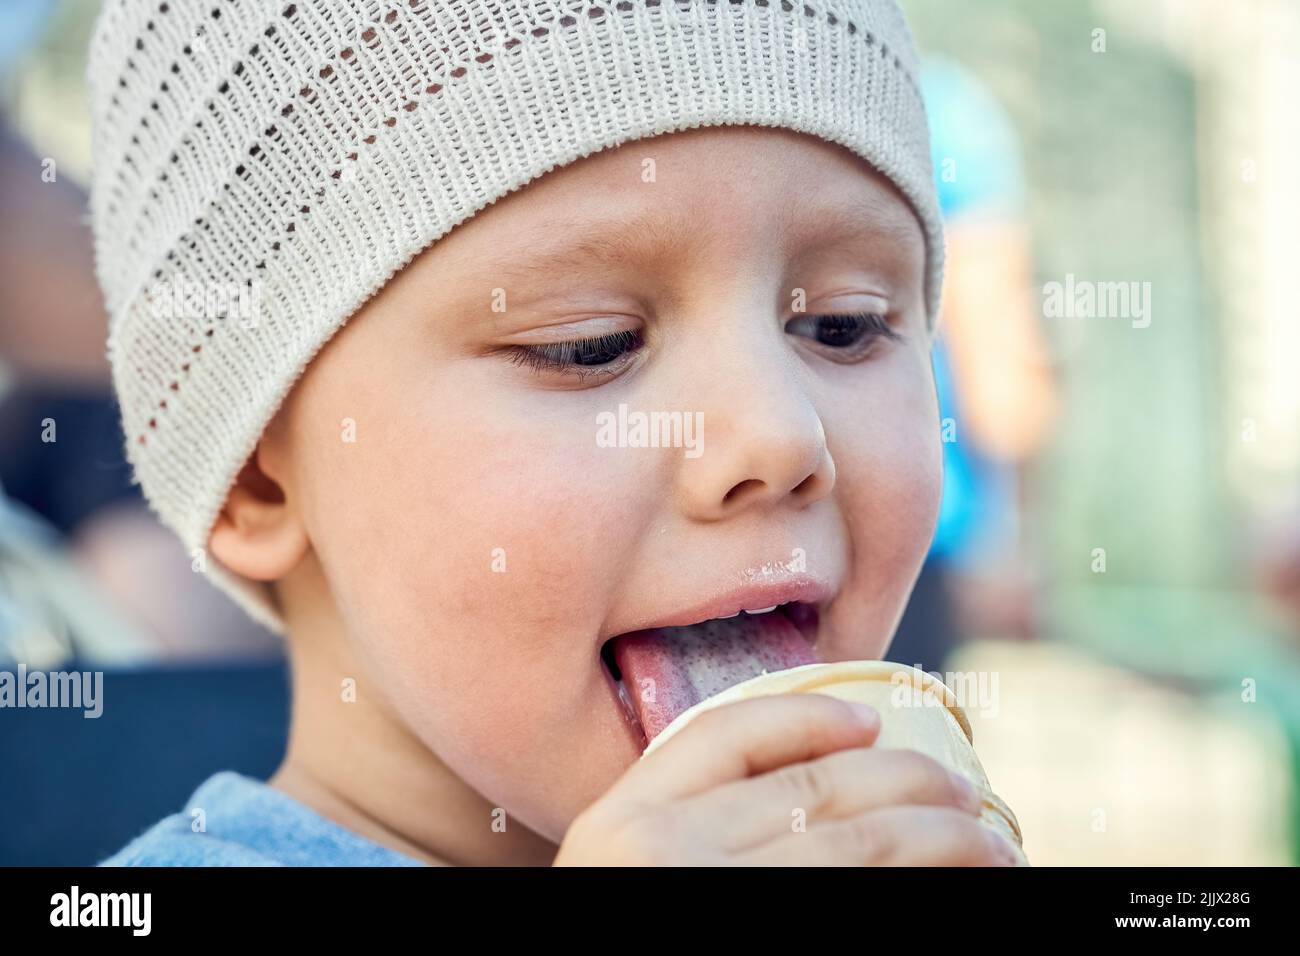 Little boy in white knitted hat licks ice cream and looks down. Toddler enjoys milk ice-cream in waffle cup closeup. Happy carefree childhood concept Stock Photo